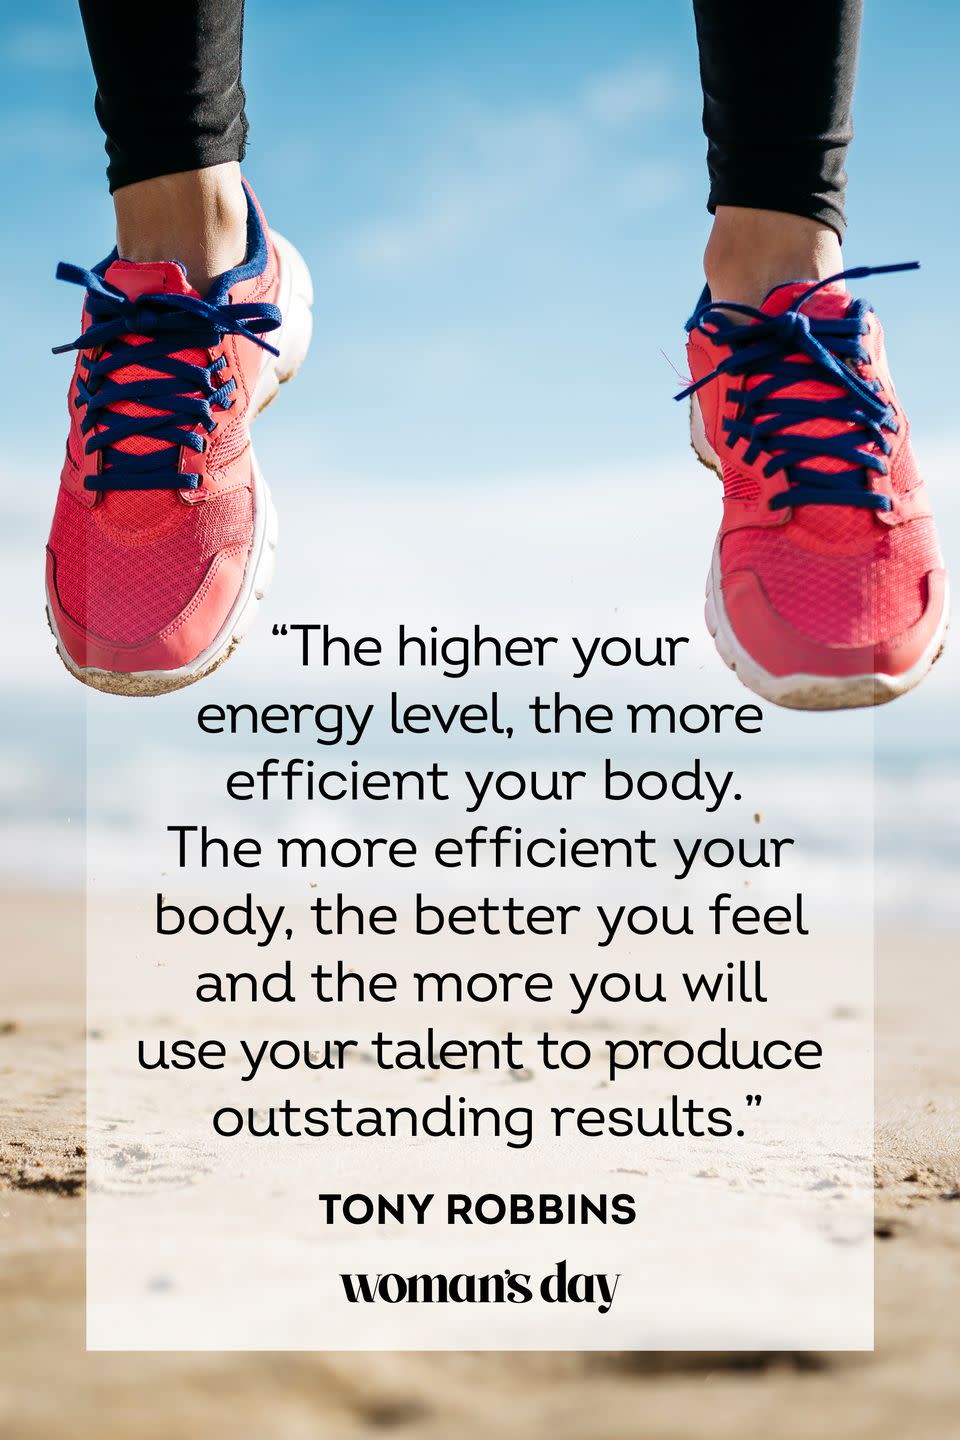 <p>“The higher your energy level, the more efficient your body. The more efficient your body, the better you feel and the more you will use your talent to produce outstanding results.”</p>